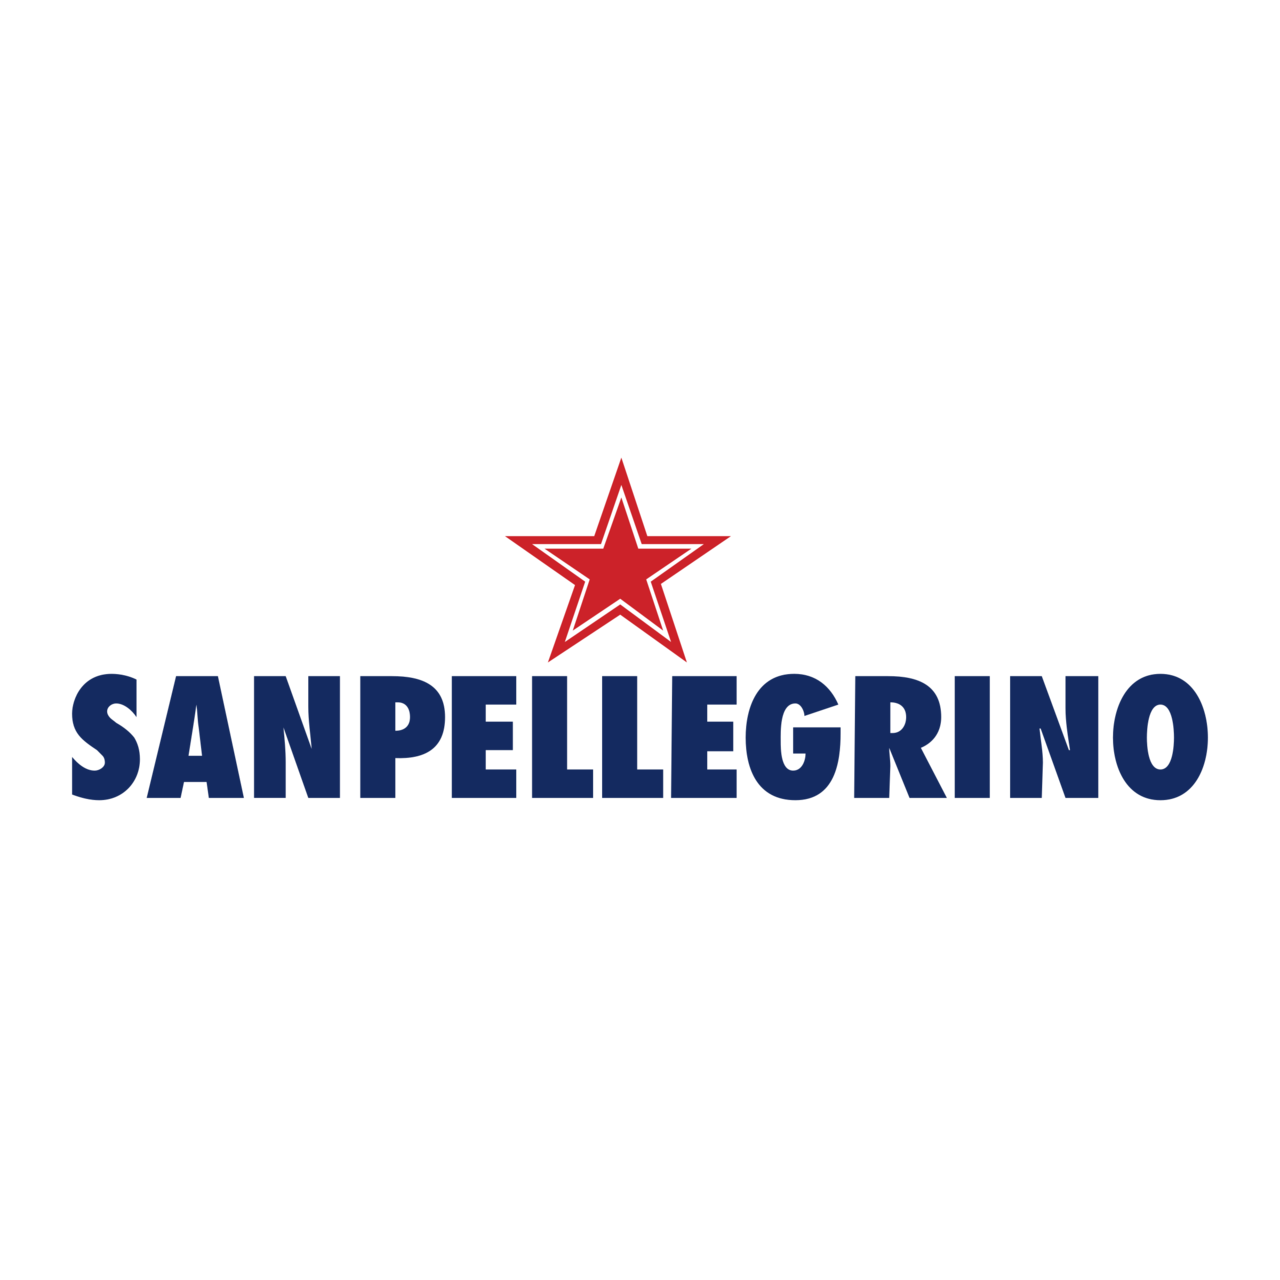 Download S pellegrino Logo PNG and Vector (PDF, SVG, Ai, EPS) Free